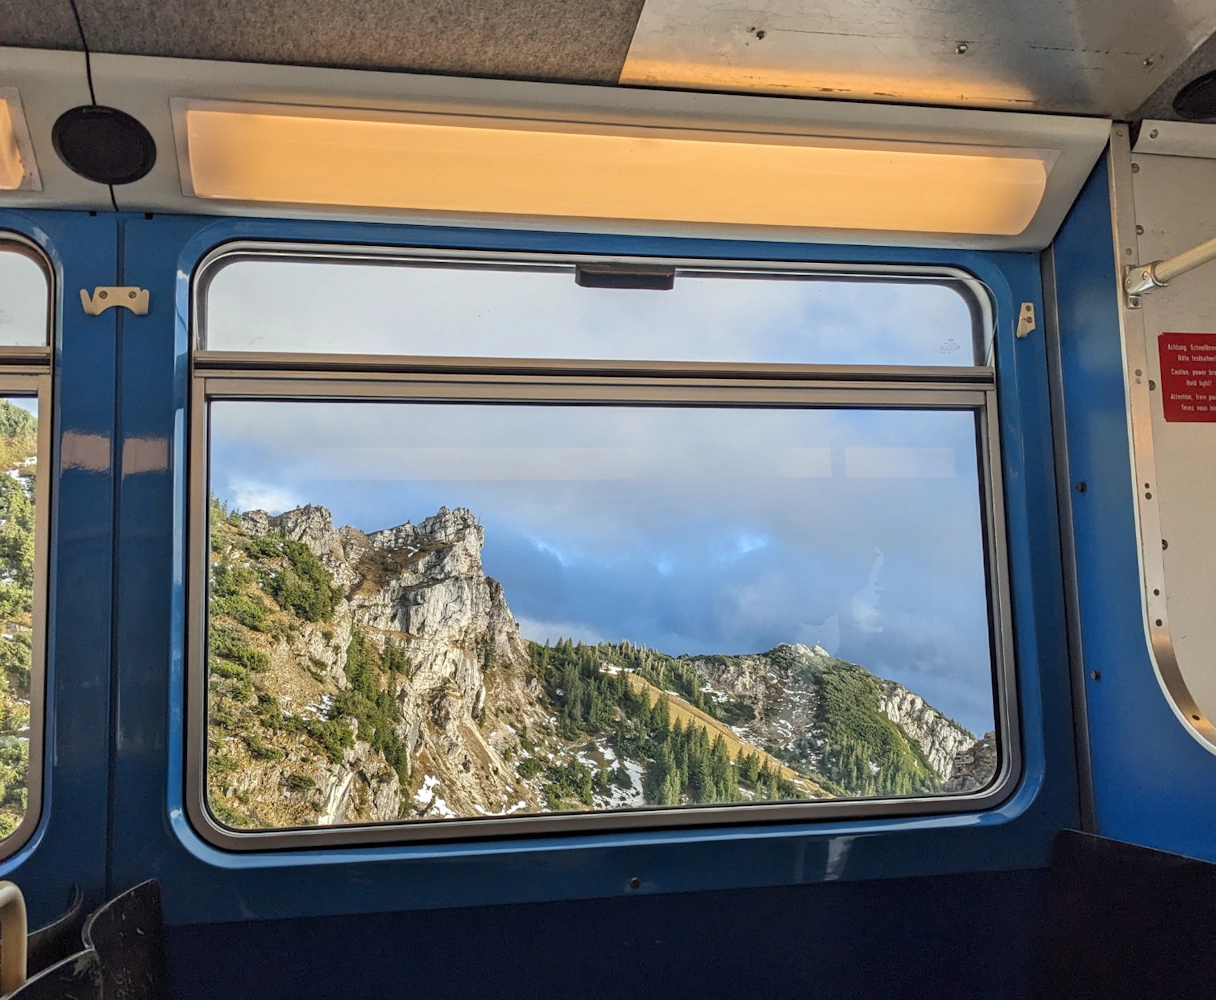 View from the cog railroad on the Wendelstein. Mountains and landscape